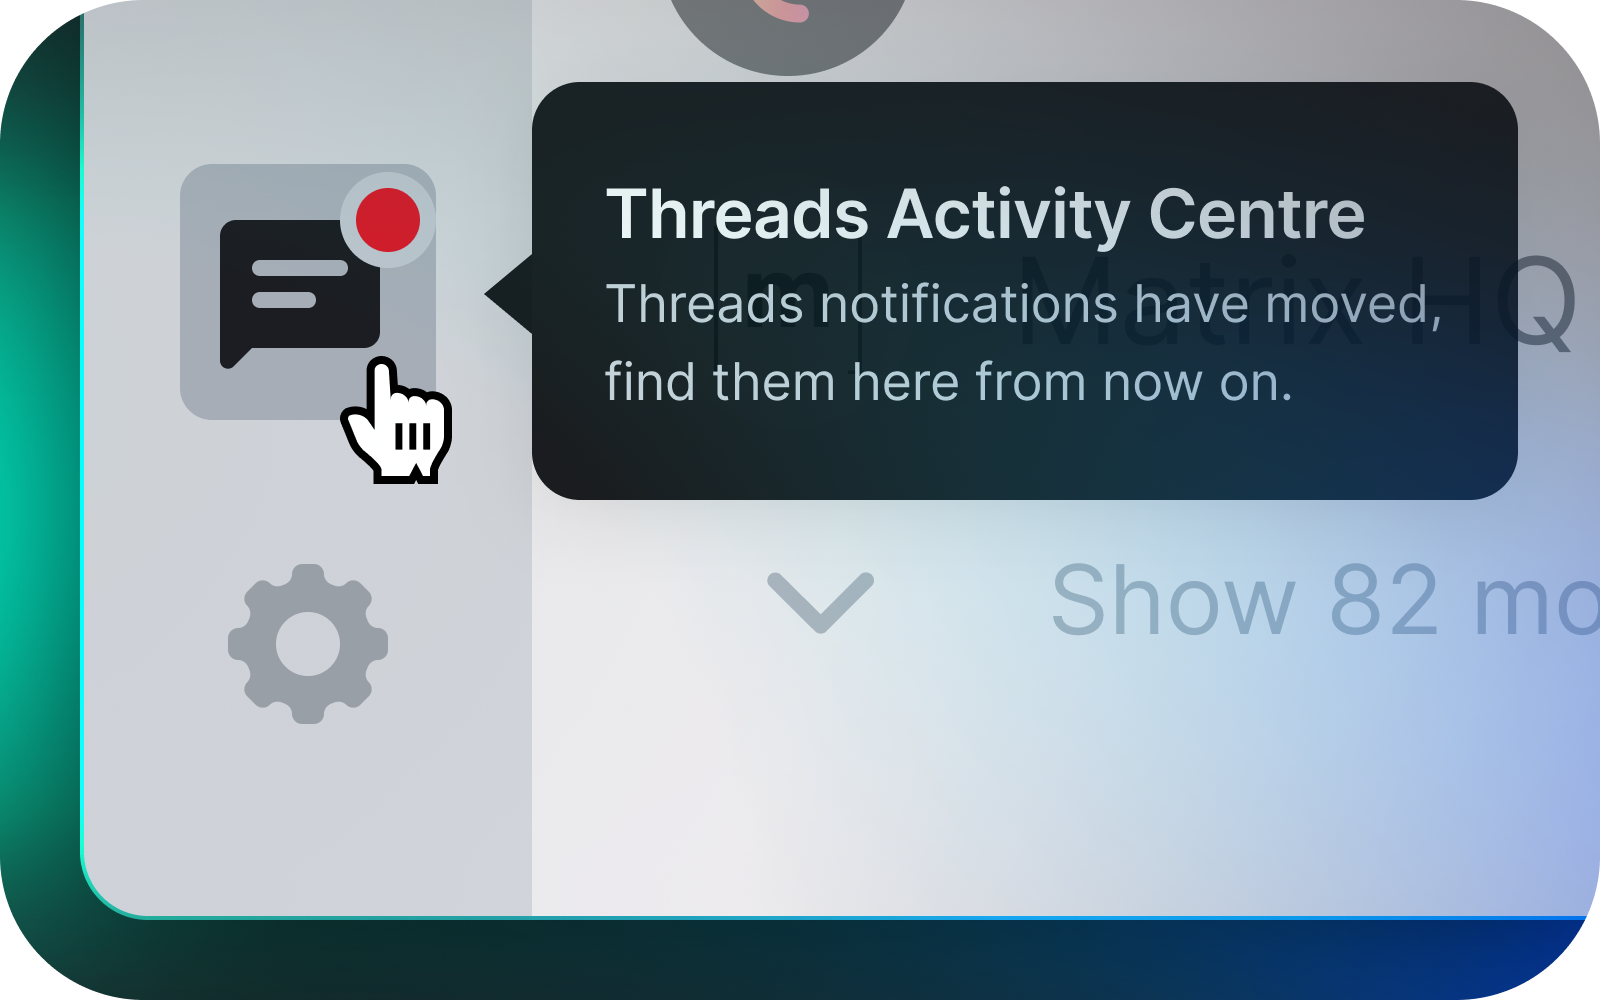 A graphic representing the bottom left corner of the app, focusing on the threads notification icon